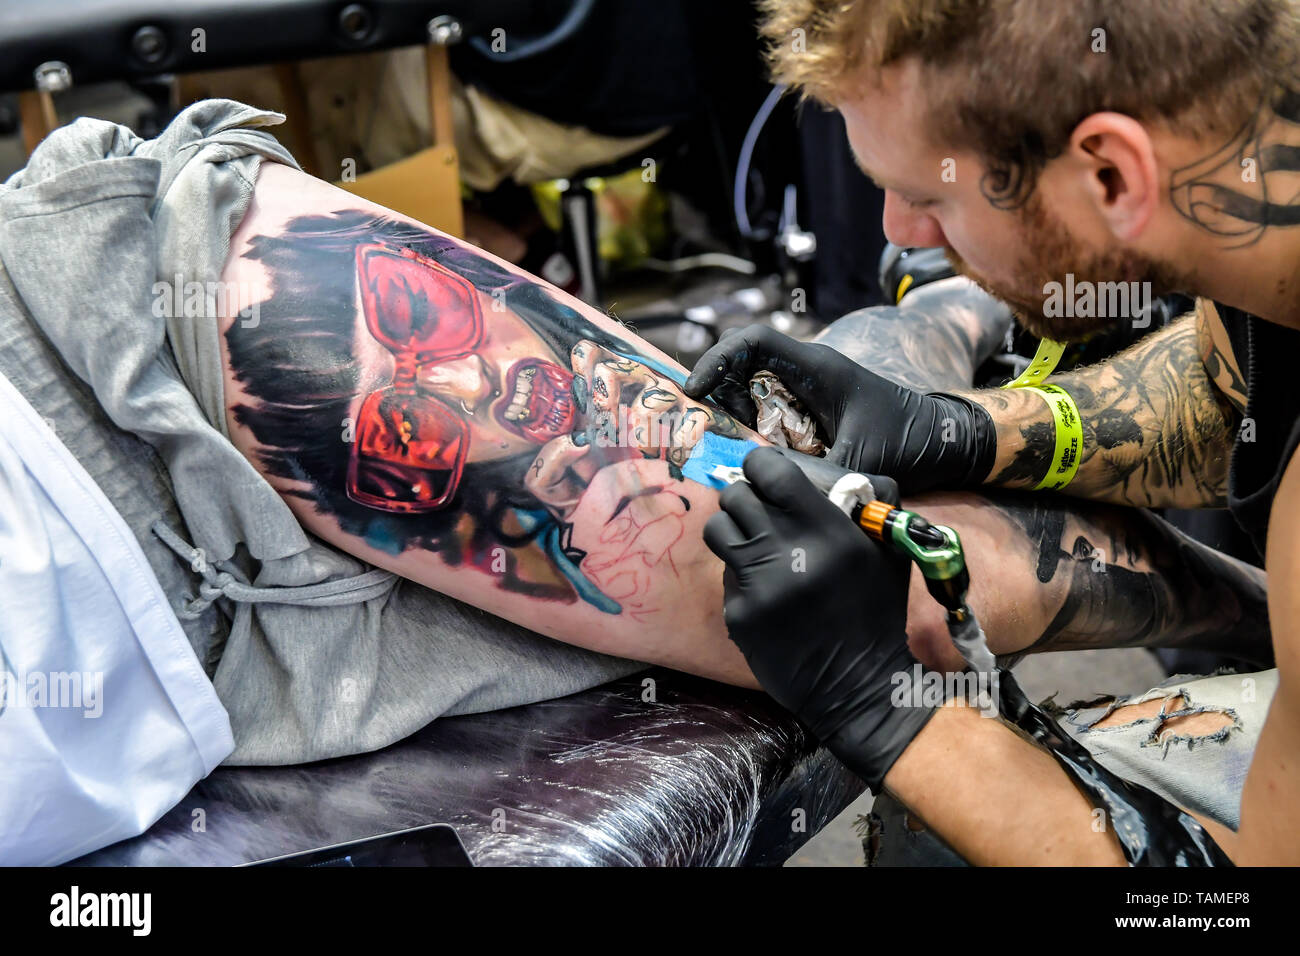 London, UK. 26th May, 2019. Jarda Tattoo London, Tattoo a client at The Great British Tattoo Show, on 26 May 2019, London, UK. Credit: Picture Capital/Alamy Live News Stock Photo